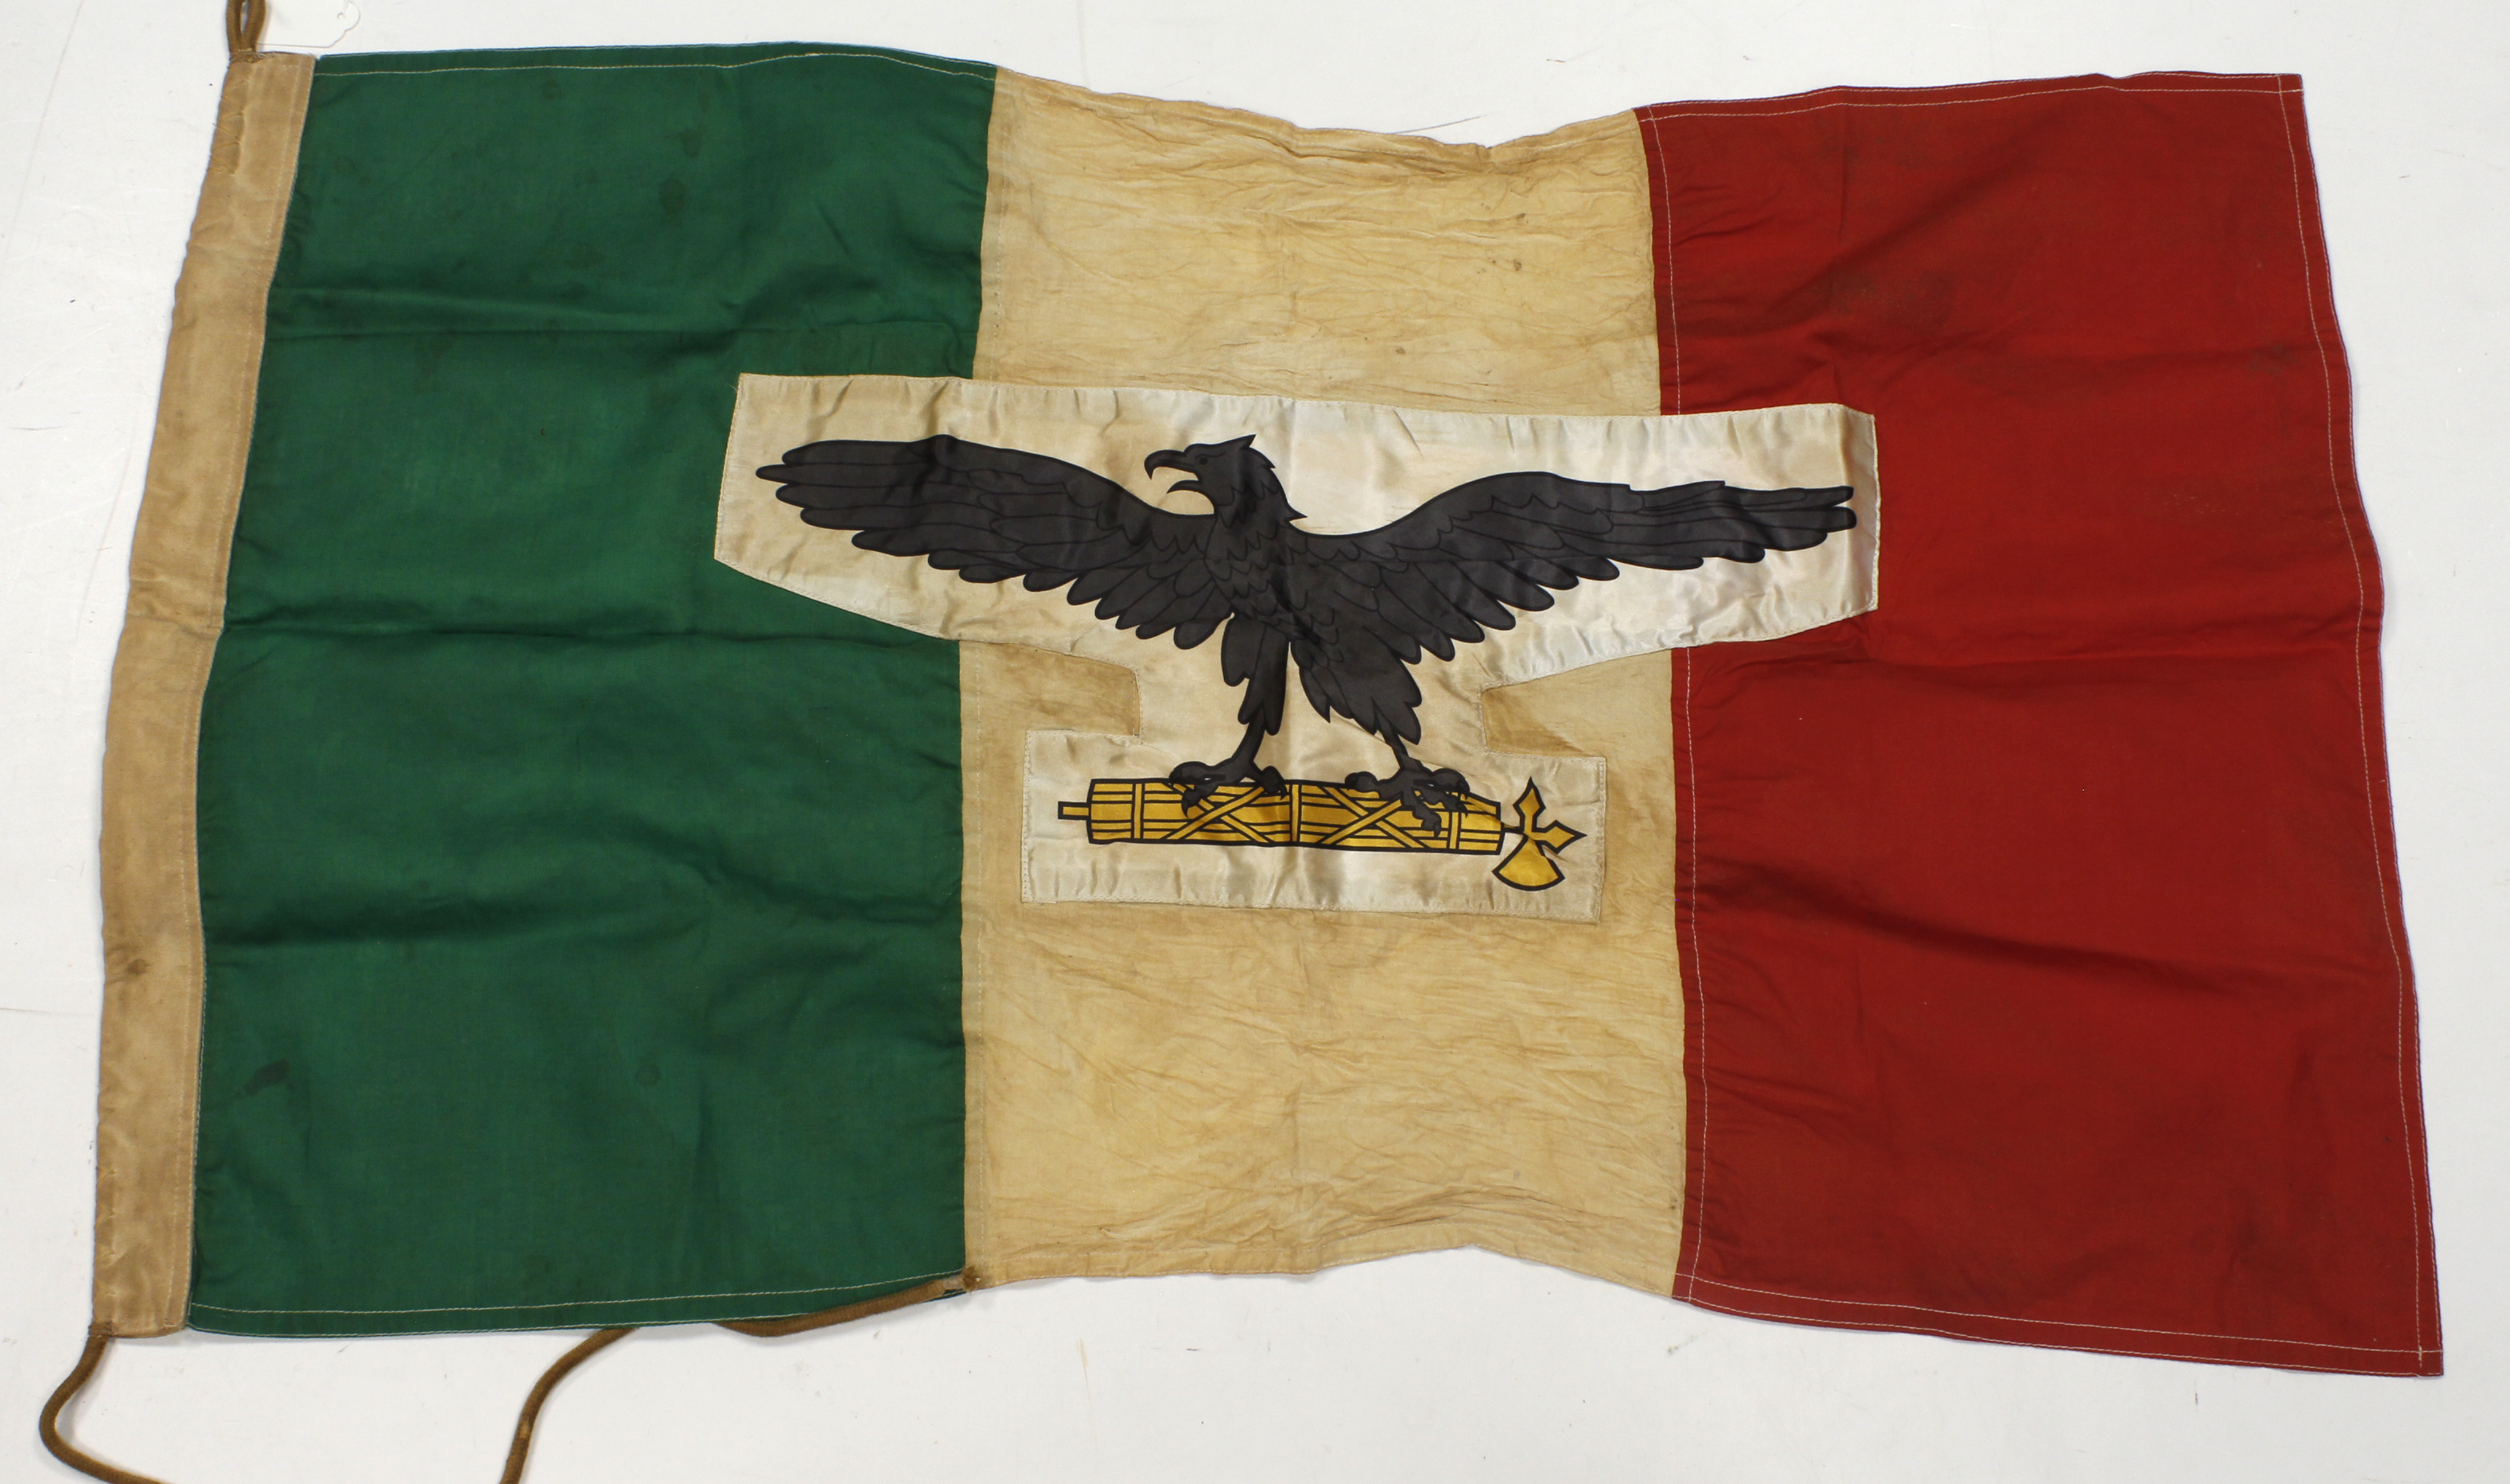 Italian RSi Fascist flag, the last era of Mussolinis Facism. Nice issue stamps to edge.